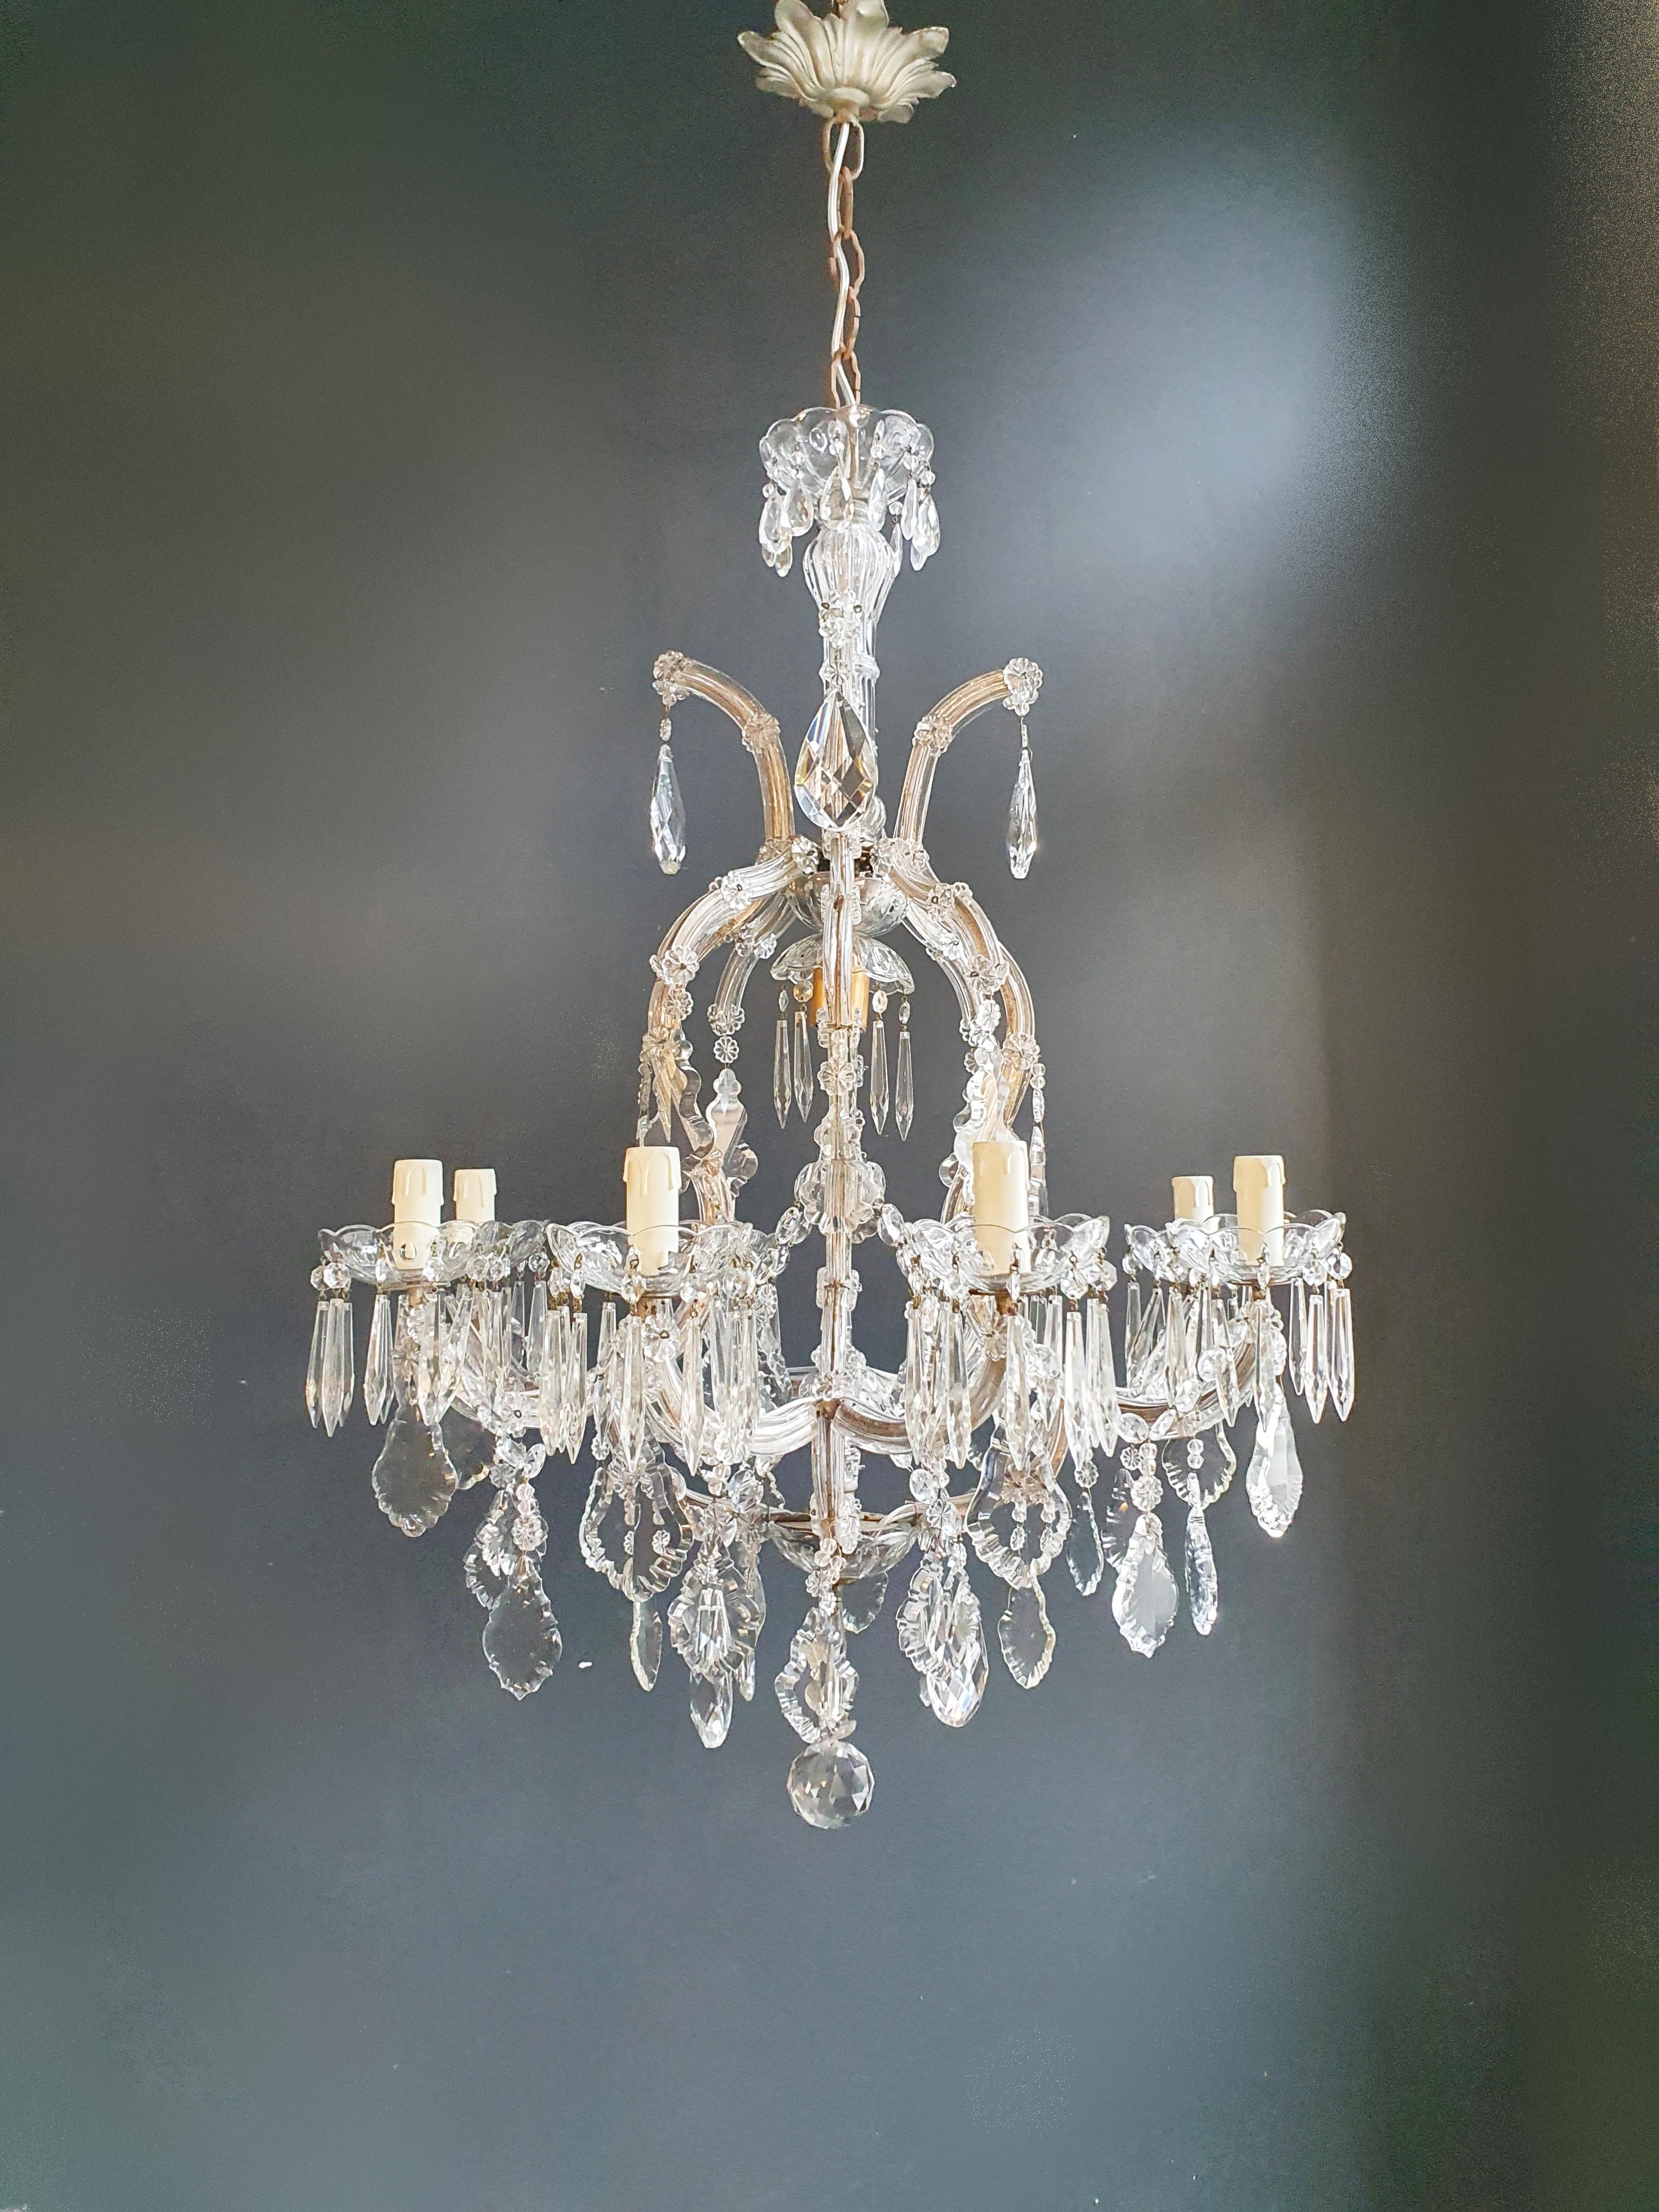 Hand-Knotted Maria Theresa Crystal Chandelier Antique Classic Clear Glass